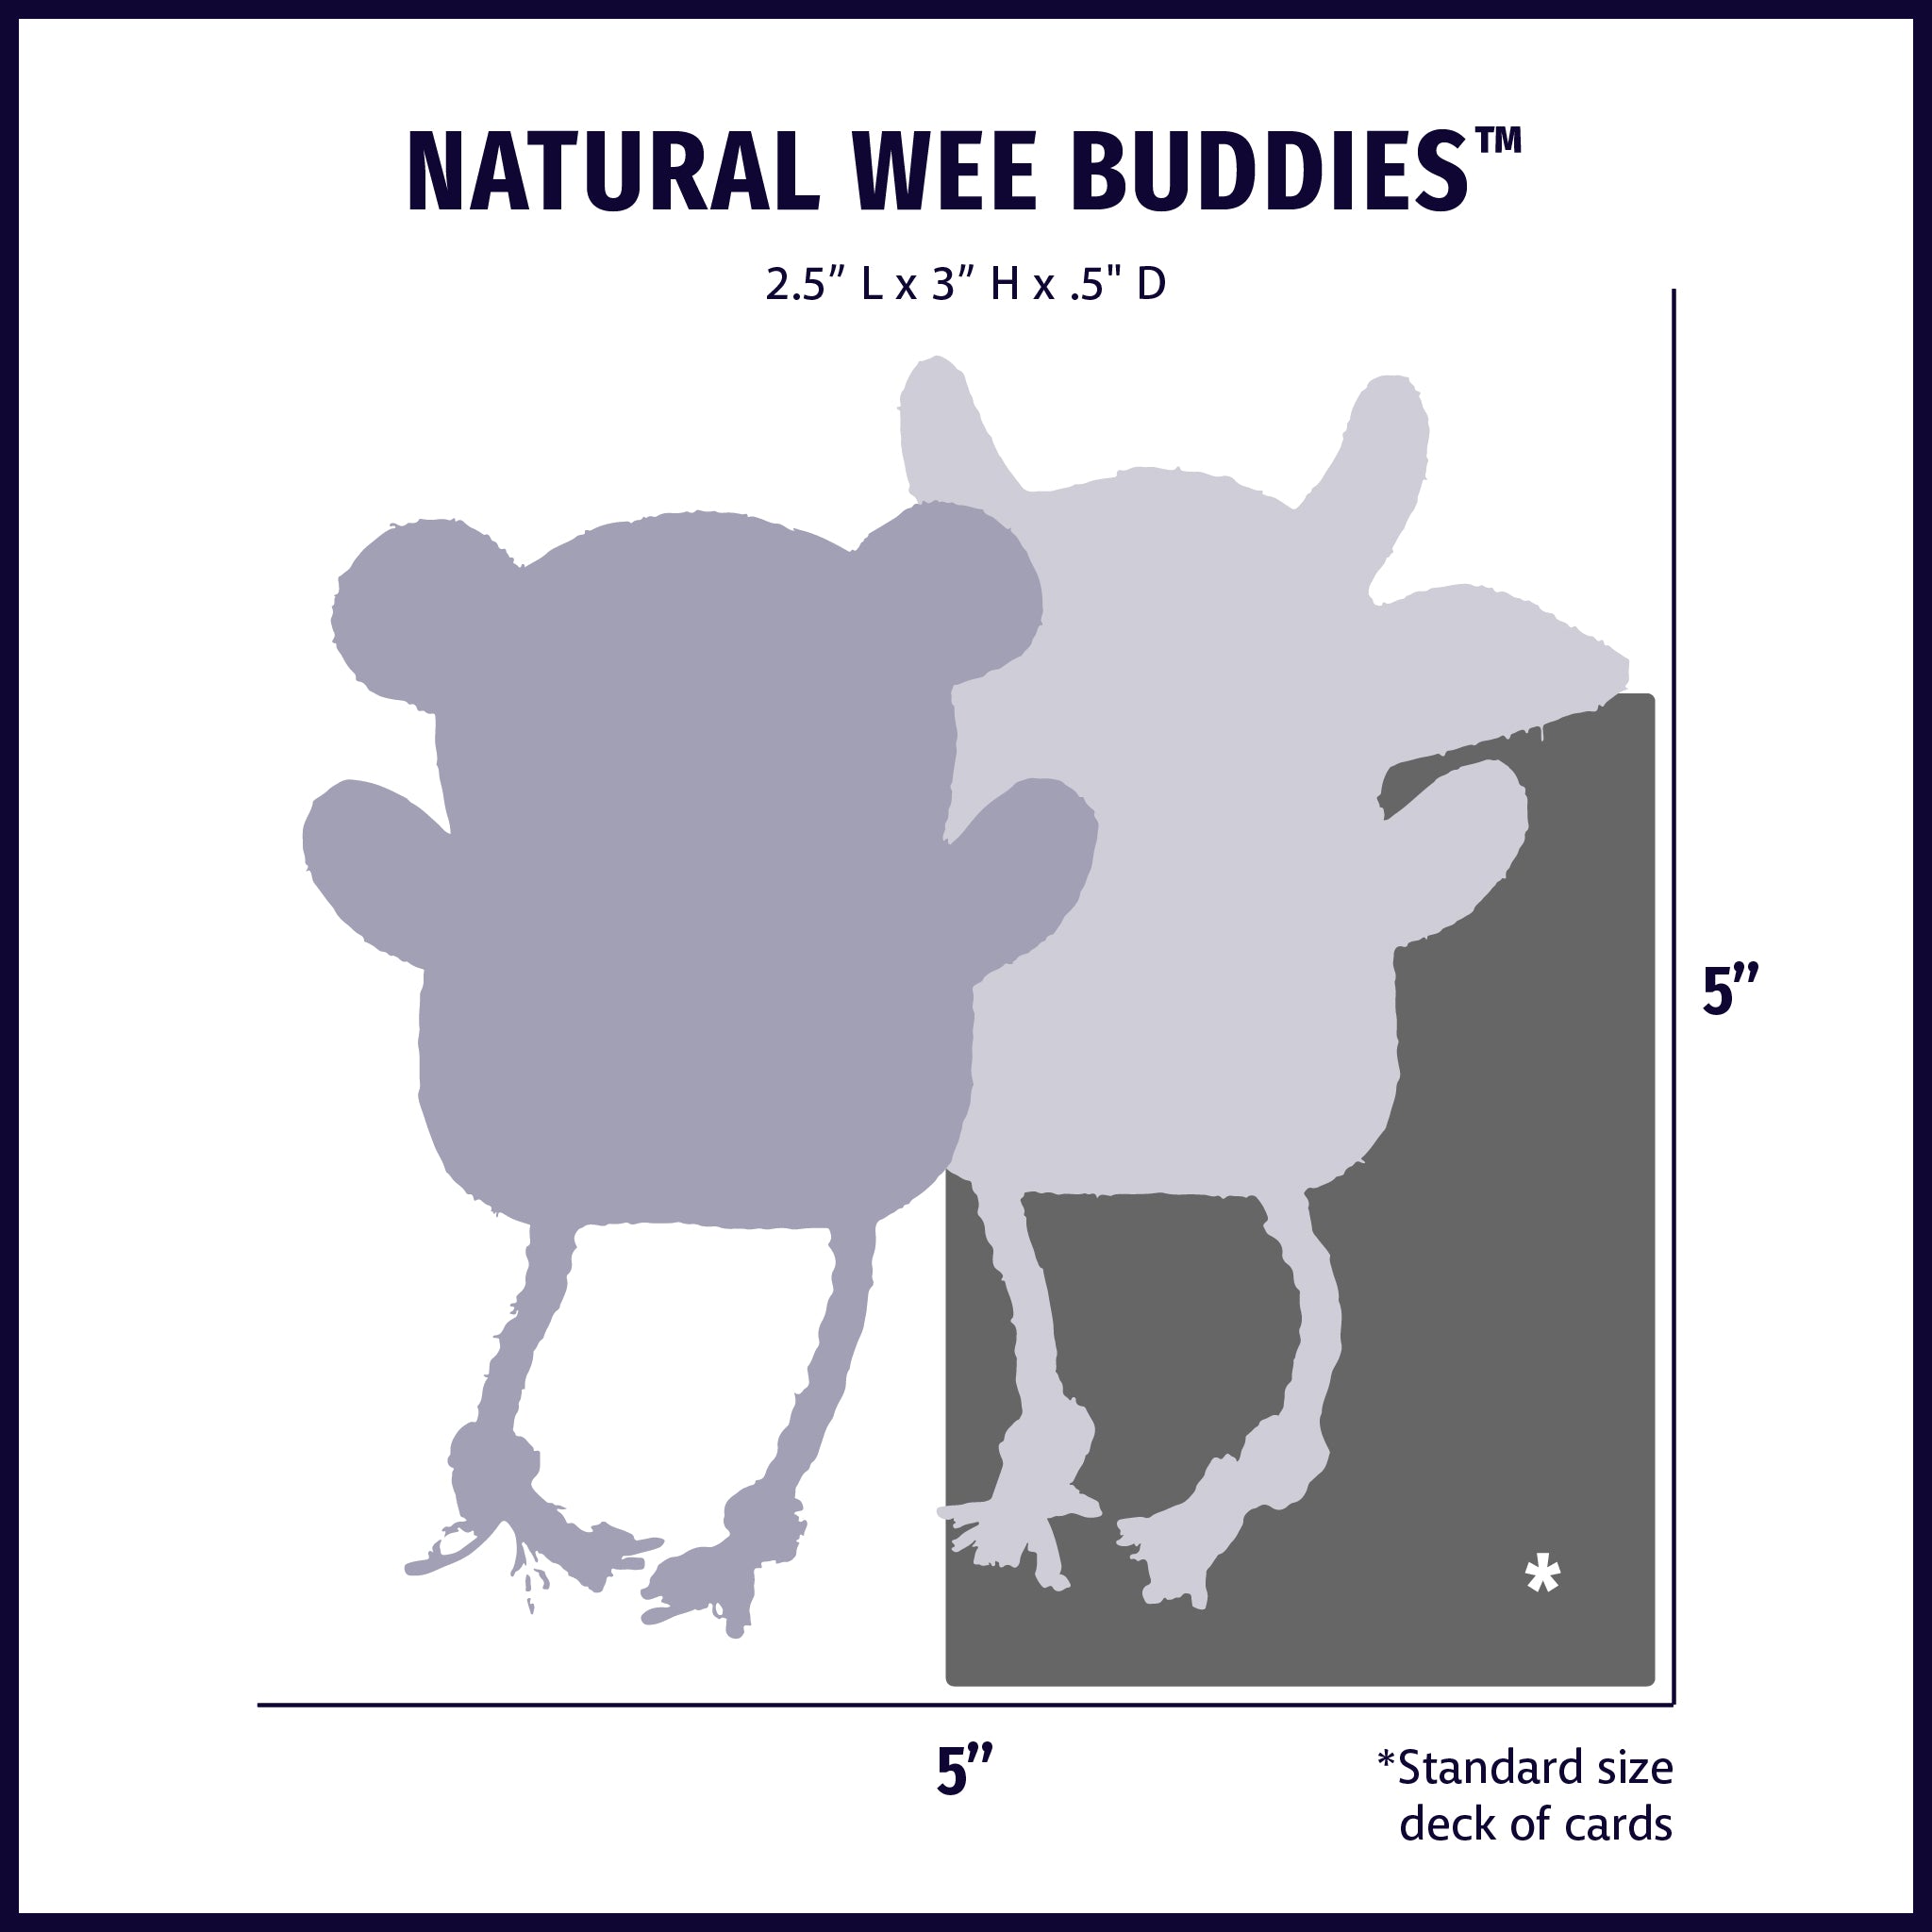 Size chart displaying Natural Wee Buddies® dog toy silhouettes with approximate dimensions compared to standard size deck of cards.